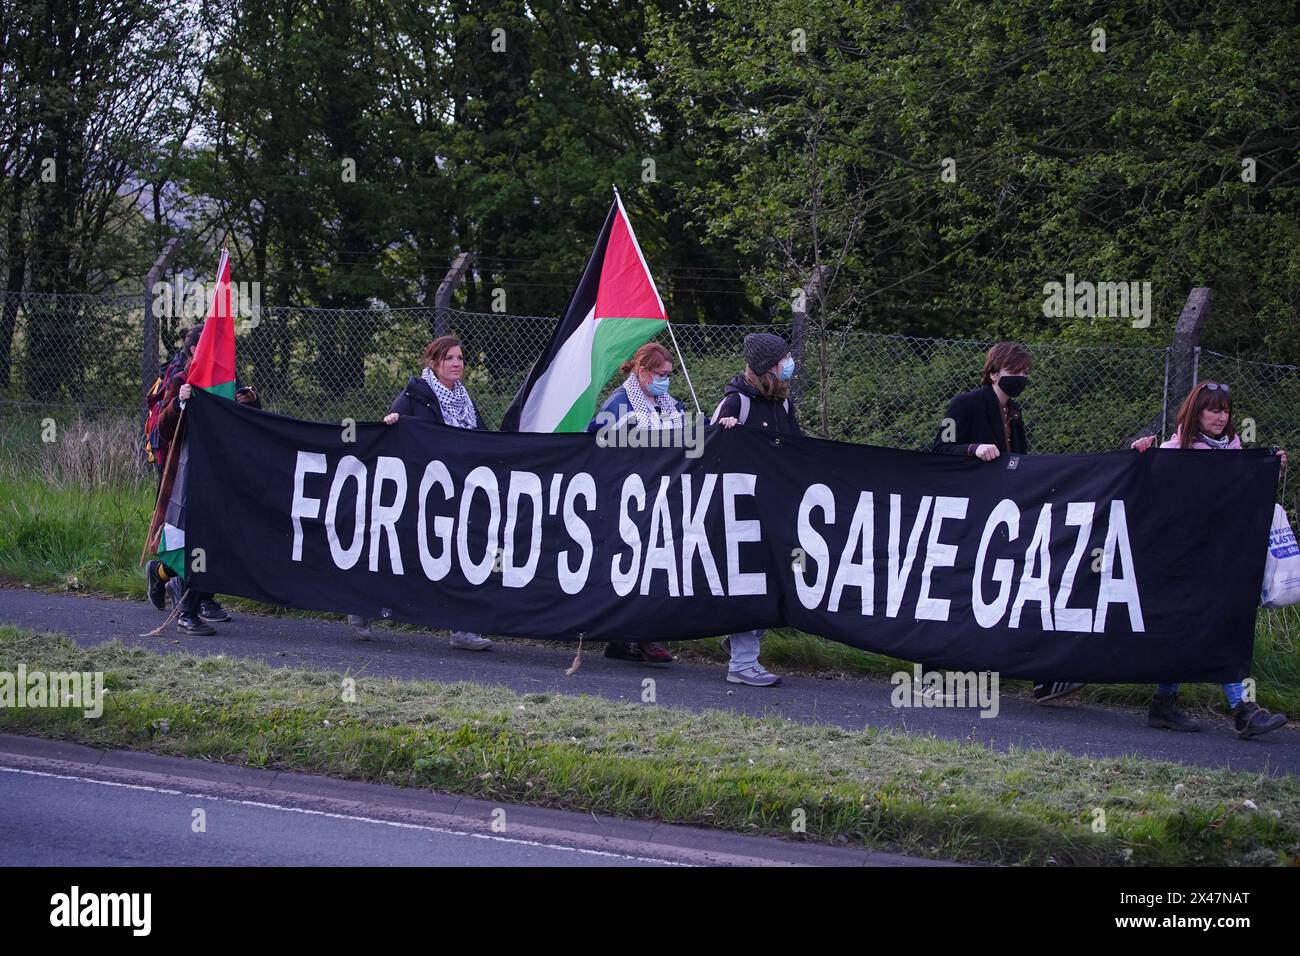 Protesters form a blockade outside weapons manufacturer BAE Systems in Samlesbury, Lancashire, in protest over the Israel-Gaza conflict and calling for an immediate ceasefire to halt the killing of civilians in Palestine. Picture date: Wednesday May 1, 2024. Stock Photo